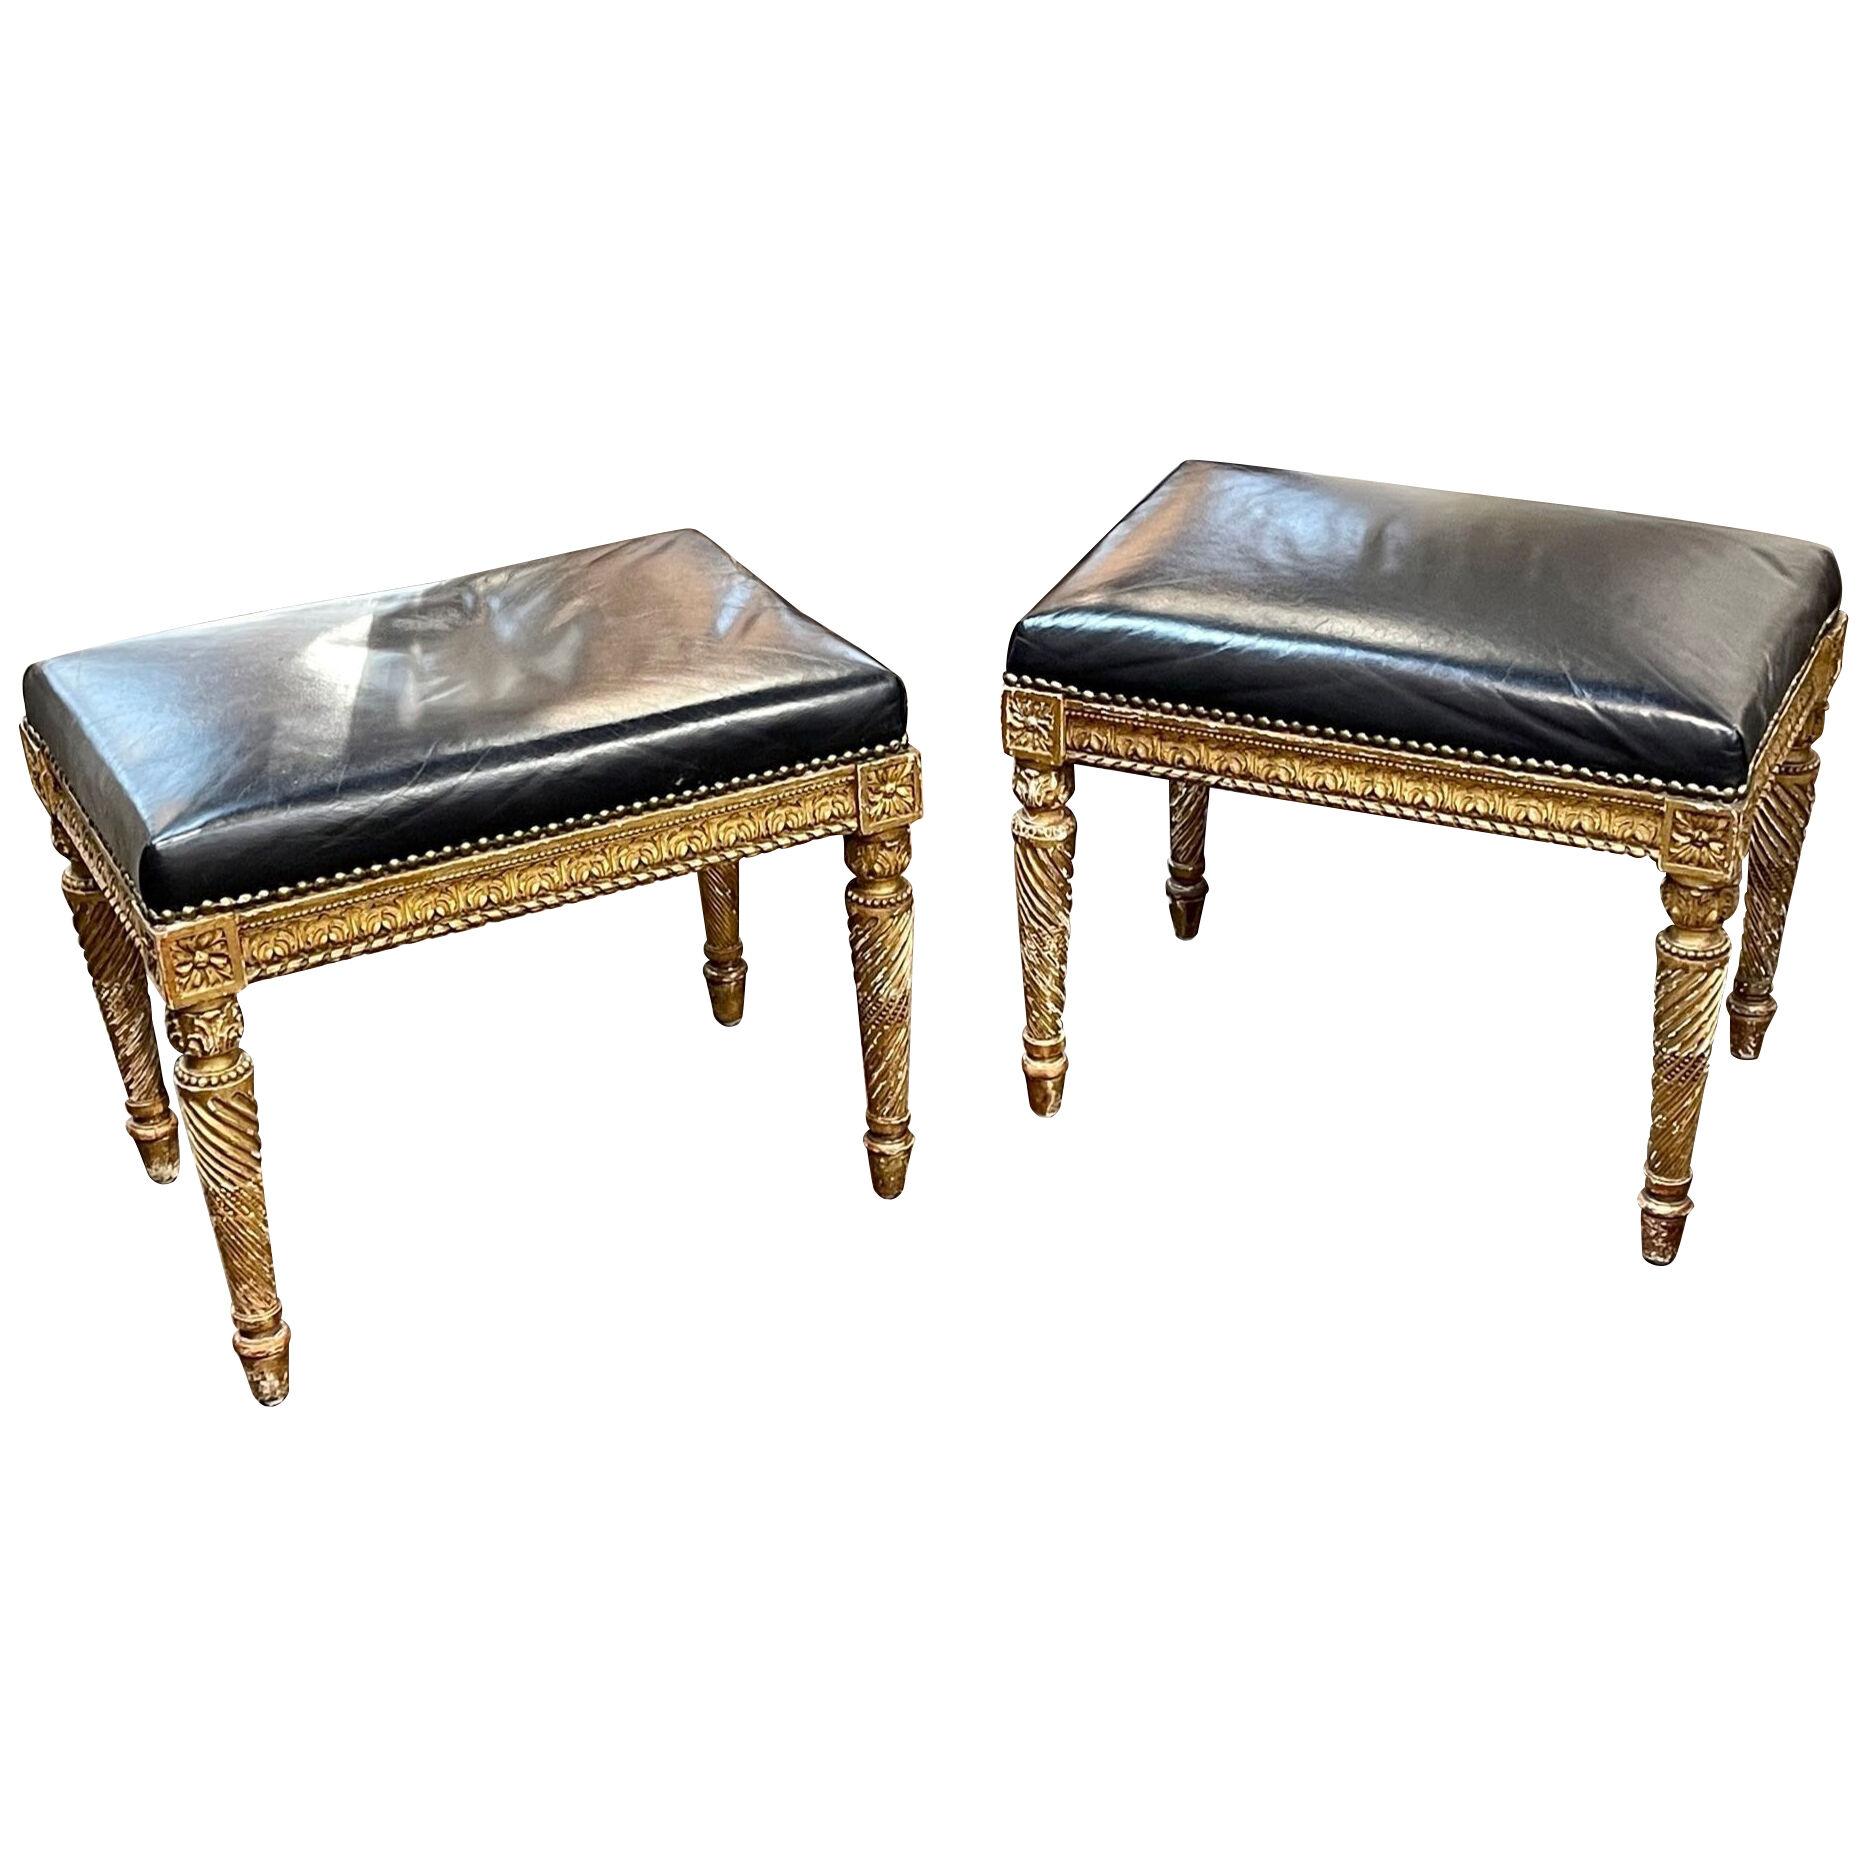 Pair of 19th Century French Louis XVI Style Gilt Wood Benches